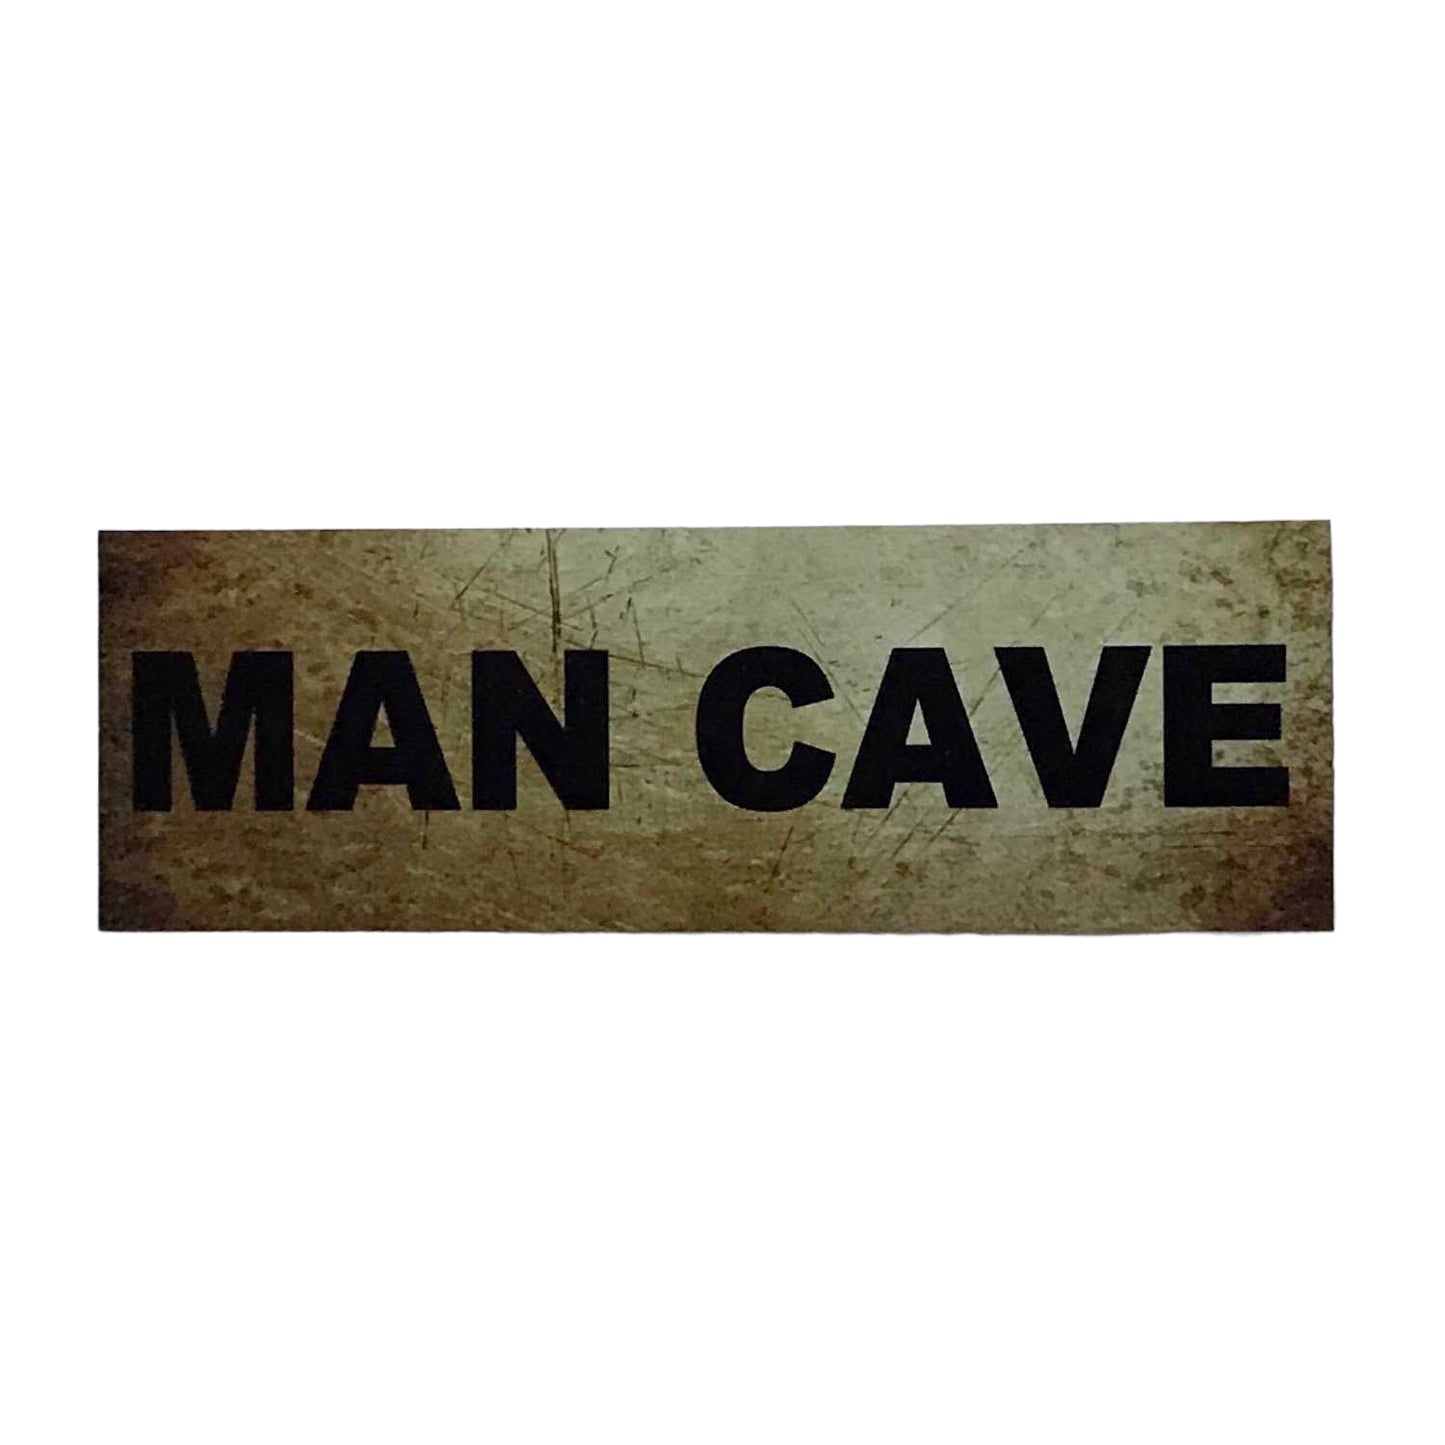 Man Cave Vintage Sign - The Renmy Store Homewares & Gifts 